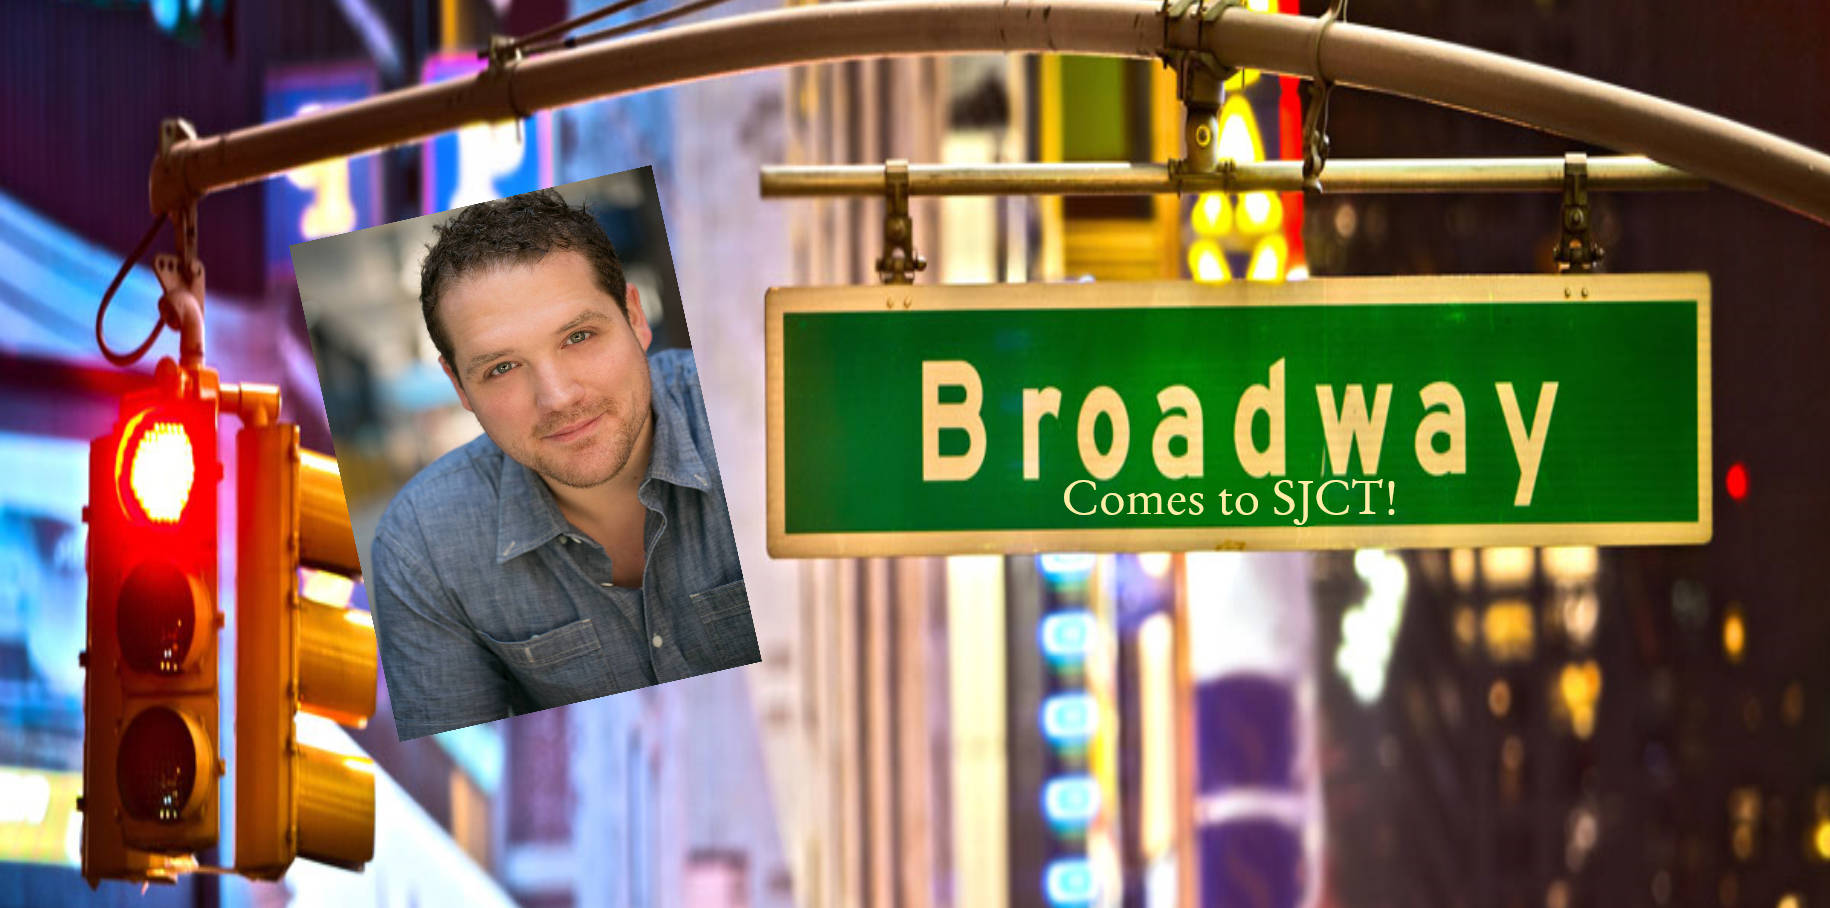 Songs and stories of Broadway